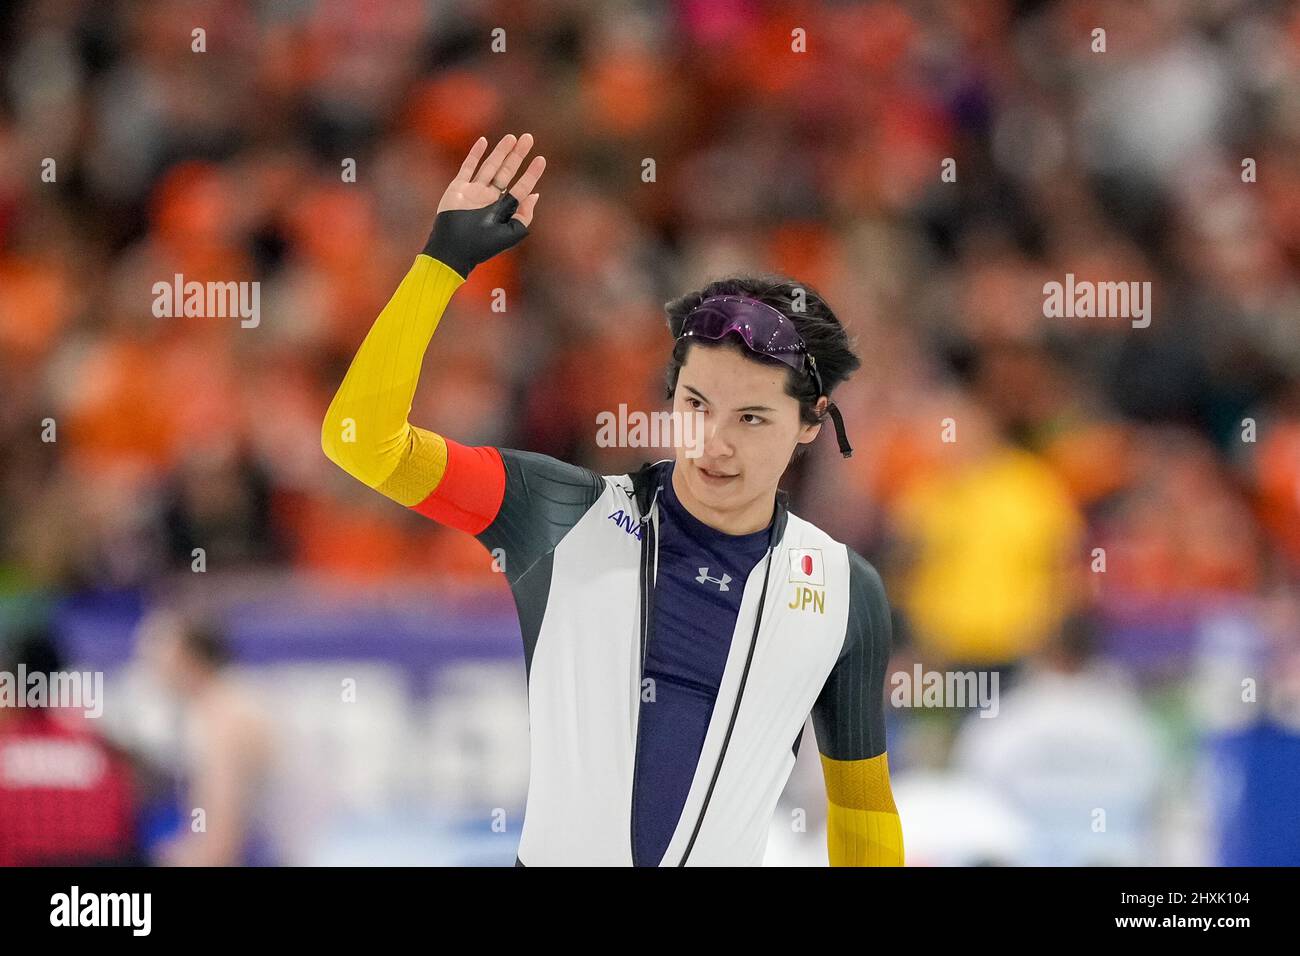 HEERENVEEN, NETHERLANDS - MARCH 13: Yamato Matsui of Japan competing in the 500m Men during the ISU World Cup Speed Skating Final at the Thialf on March 13, 2022 in Heerenveen, Netherlands (Photo by Douwe Bijlsma/Orange Pictures) Stock Photo